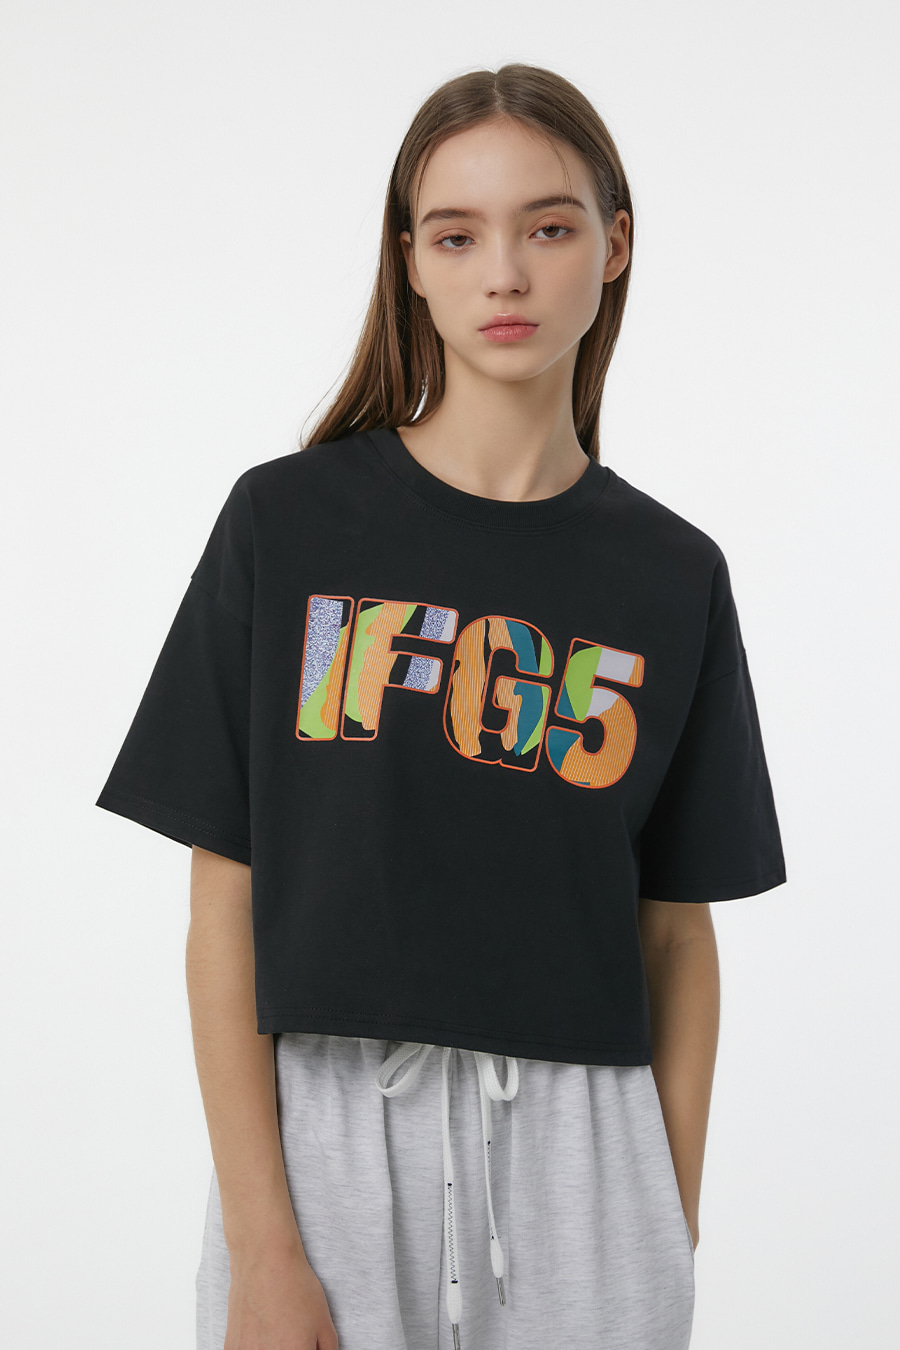 2022 S/S IFG5_3